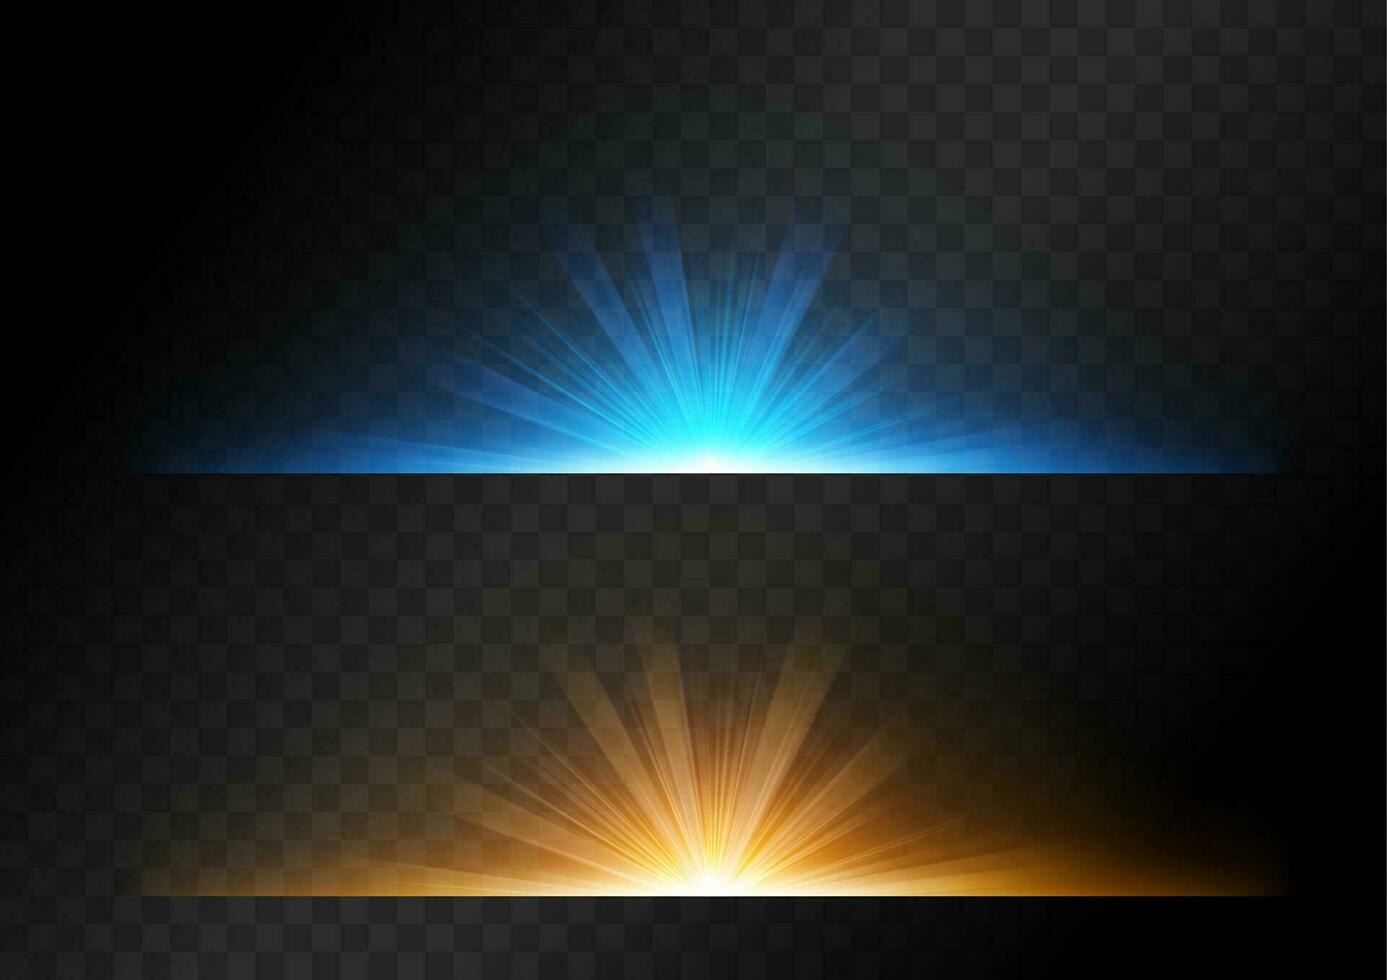 Starlight Sets with Yellow and Blue Color on Dark Background, Vector Illustration